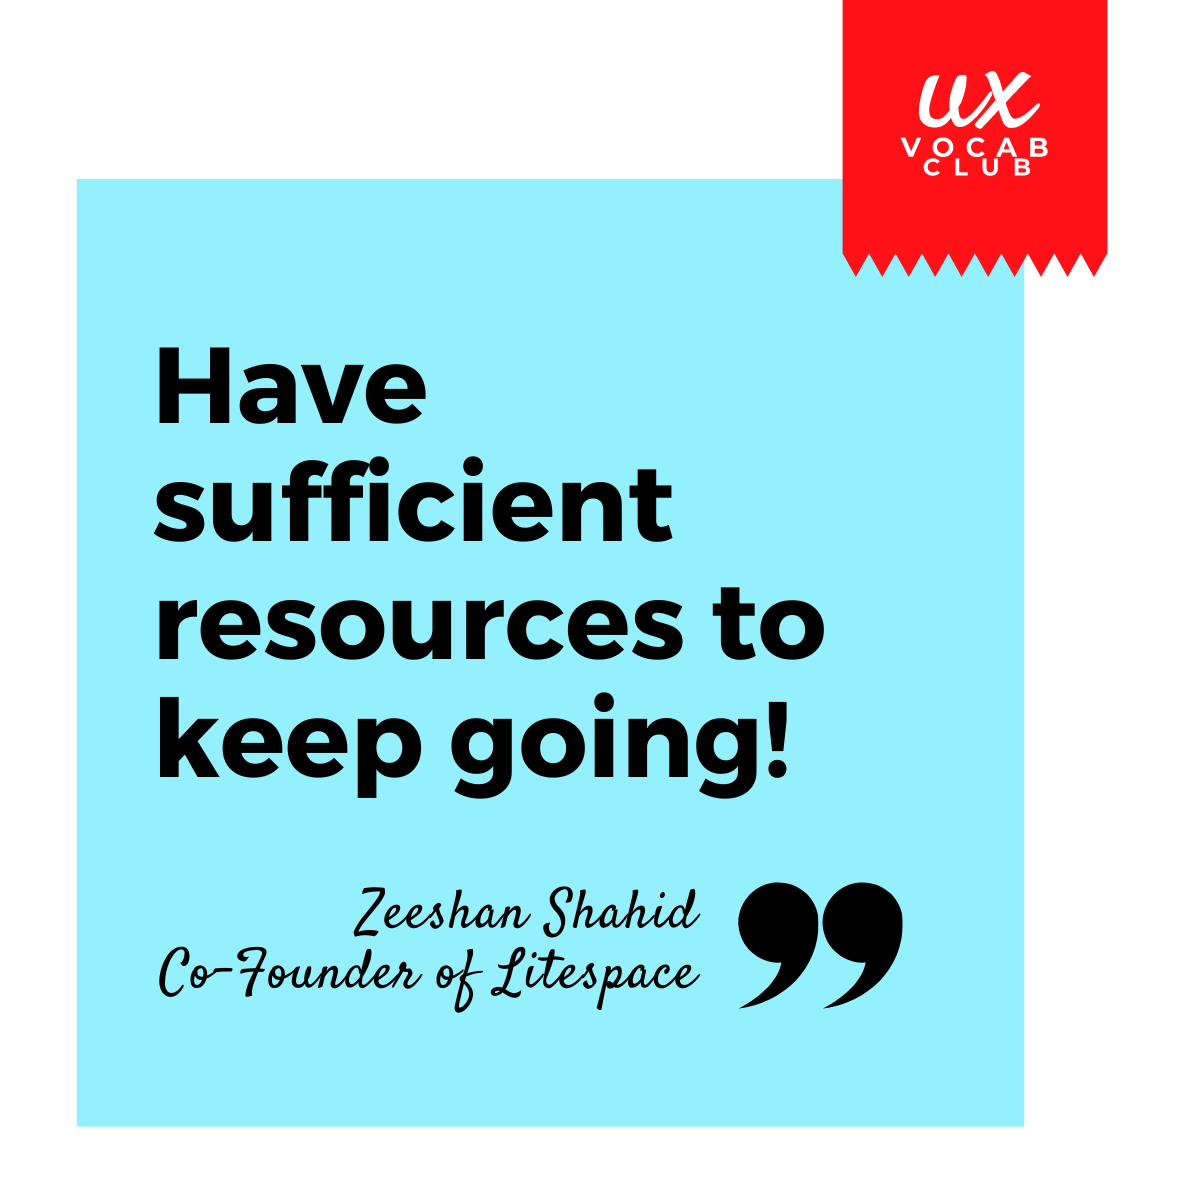 Quote from Zeeshan Shahid, Co-founder of Litespace